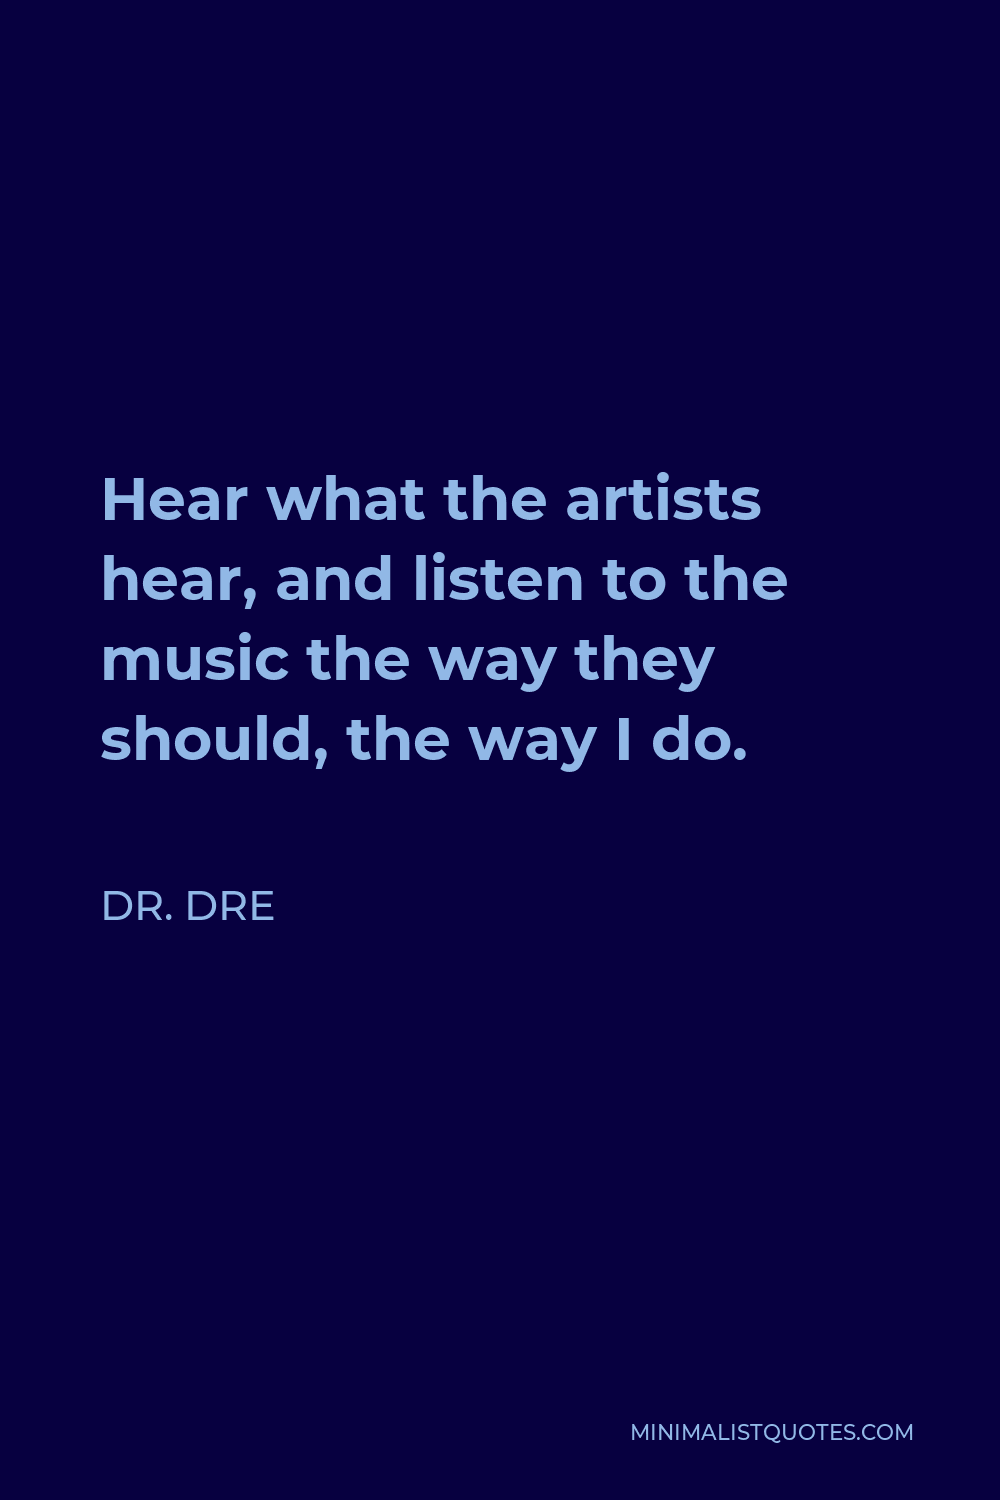 Dr. Dre Quote - Hear what the artists hear, and listen to the music the way they should, the way I do.